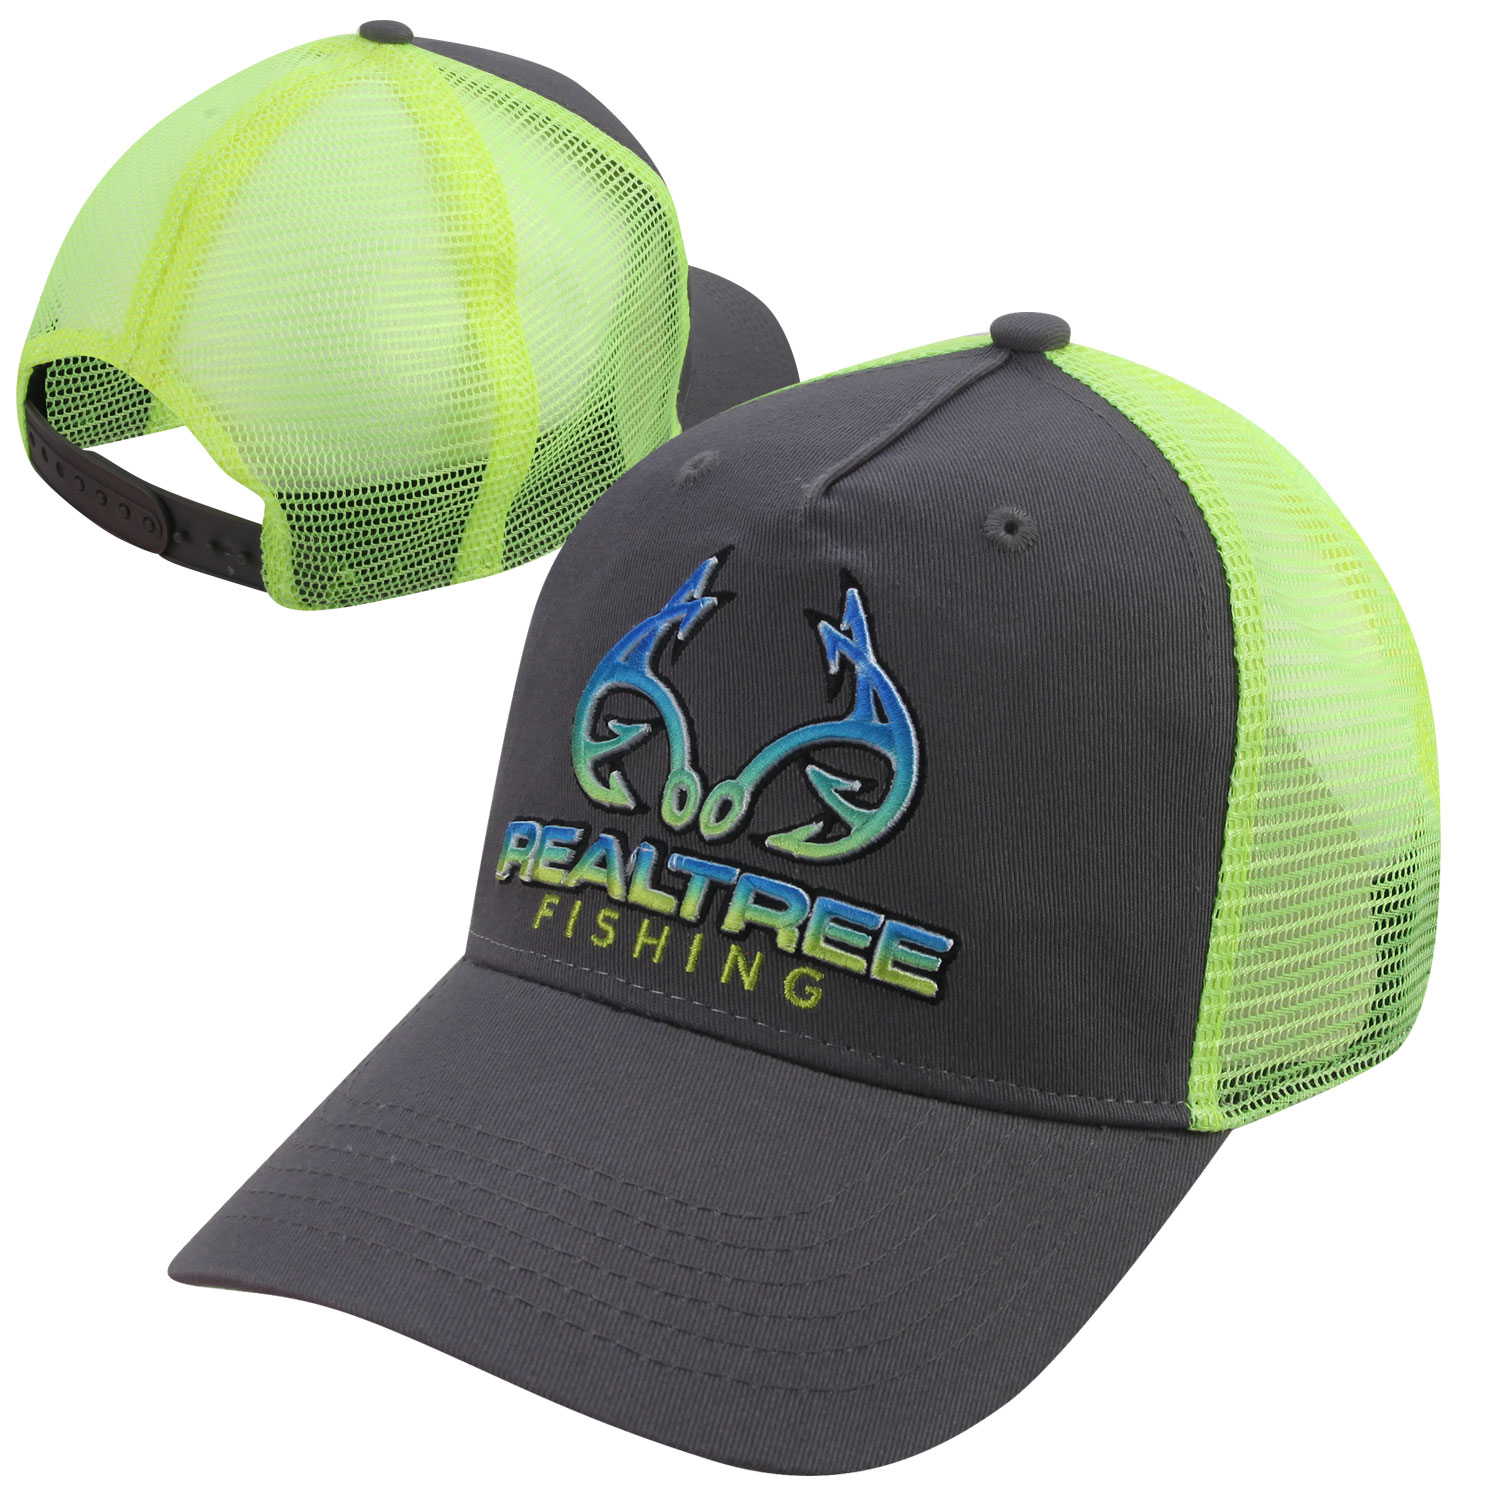 Realtree Fishing Hook Embroidered Mesh Back Trucker Cap- Charcoal/Neon  Yellow